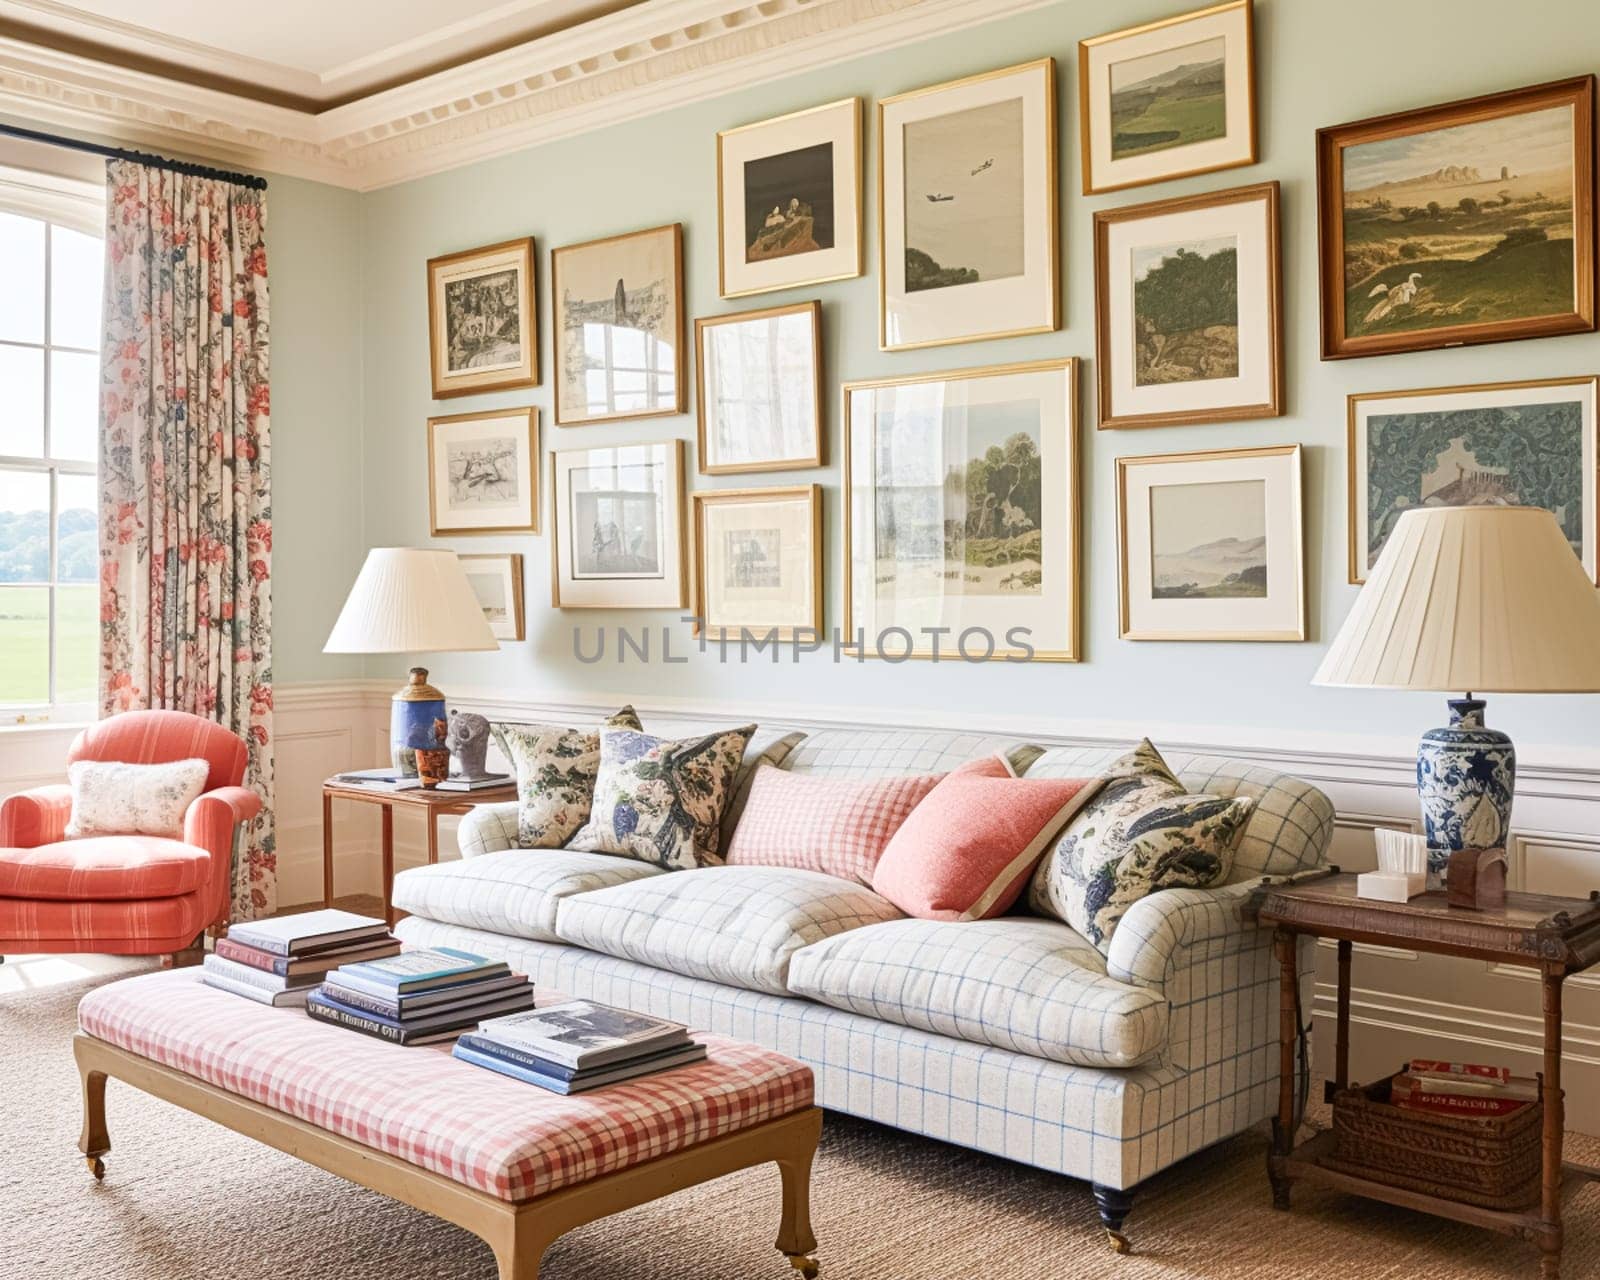 Gallery wall, home decor and wall art over sofa, framed art in modern English country cottage sitting room interior, living room for diy printable artwork and print shop idea